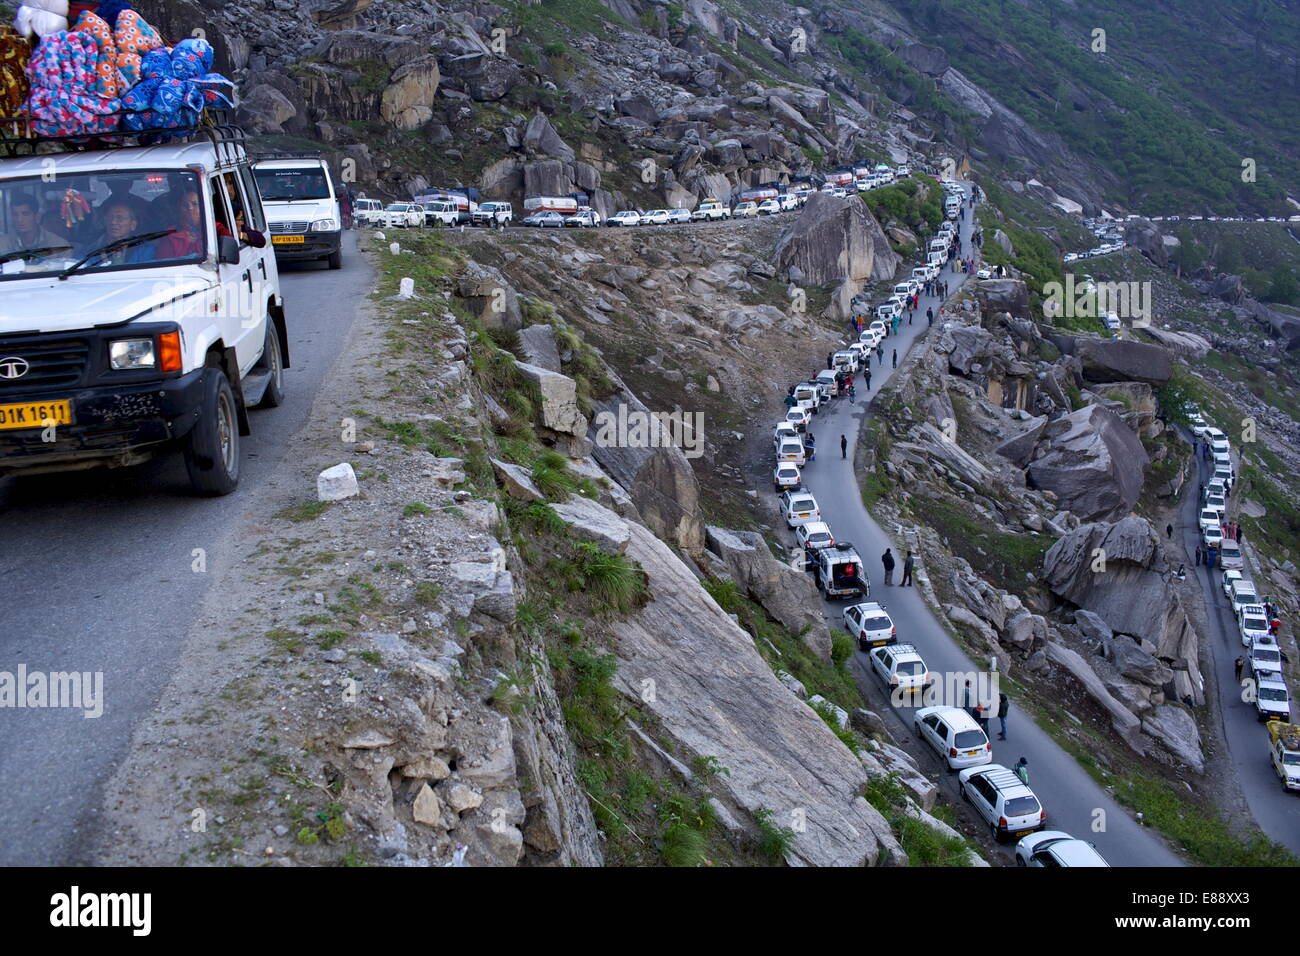 On Rohtang Pass road, traffic jam at 5 in the morning, close to Manali, road from Manali to Leh, Himachal Pradesh, India, Asia Stock Photo